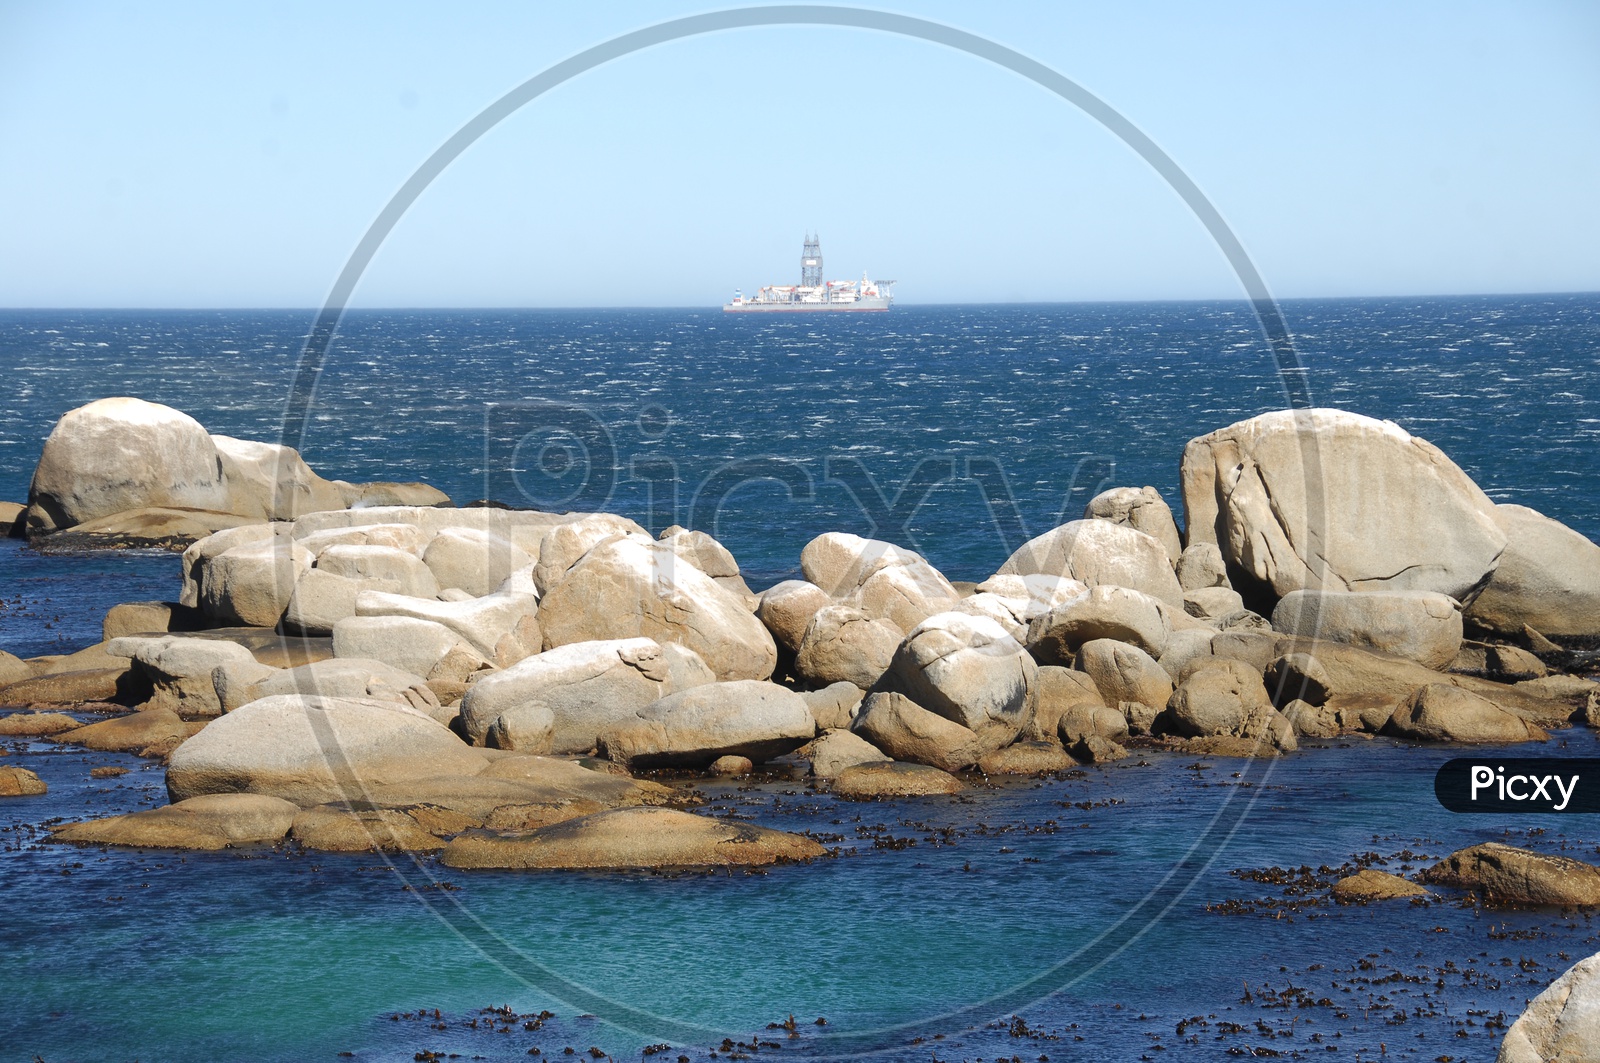 Rocks in the blue sea with a ship in the background